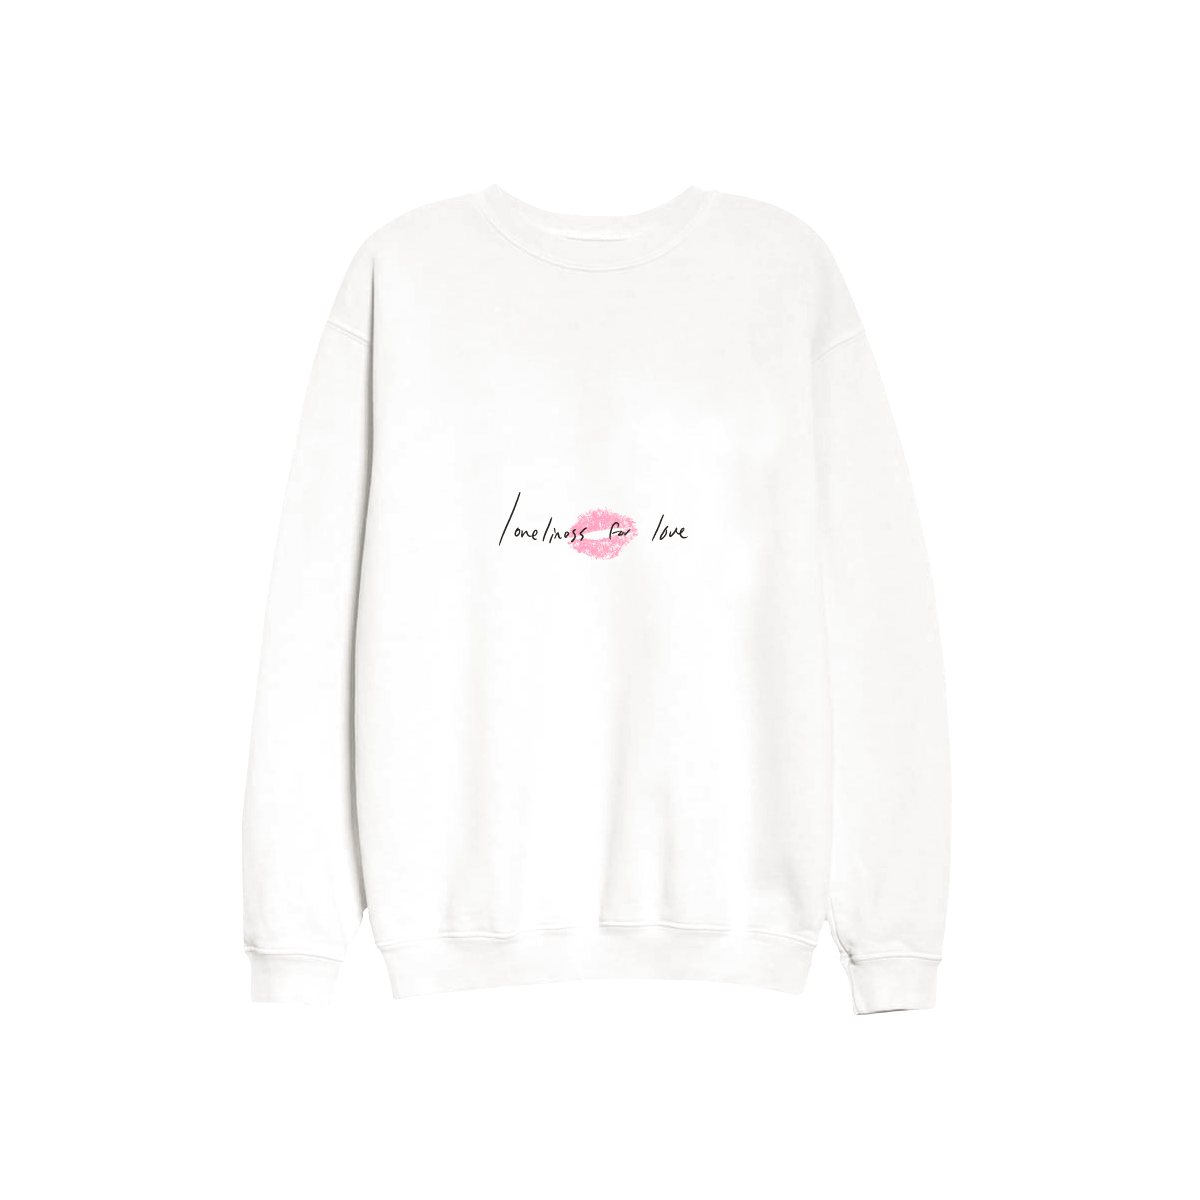 loneliness for love white hoodie & sweatpants